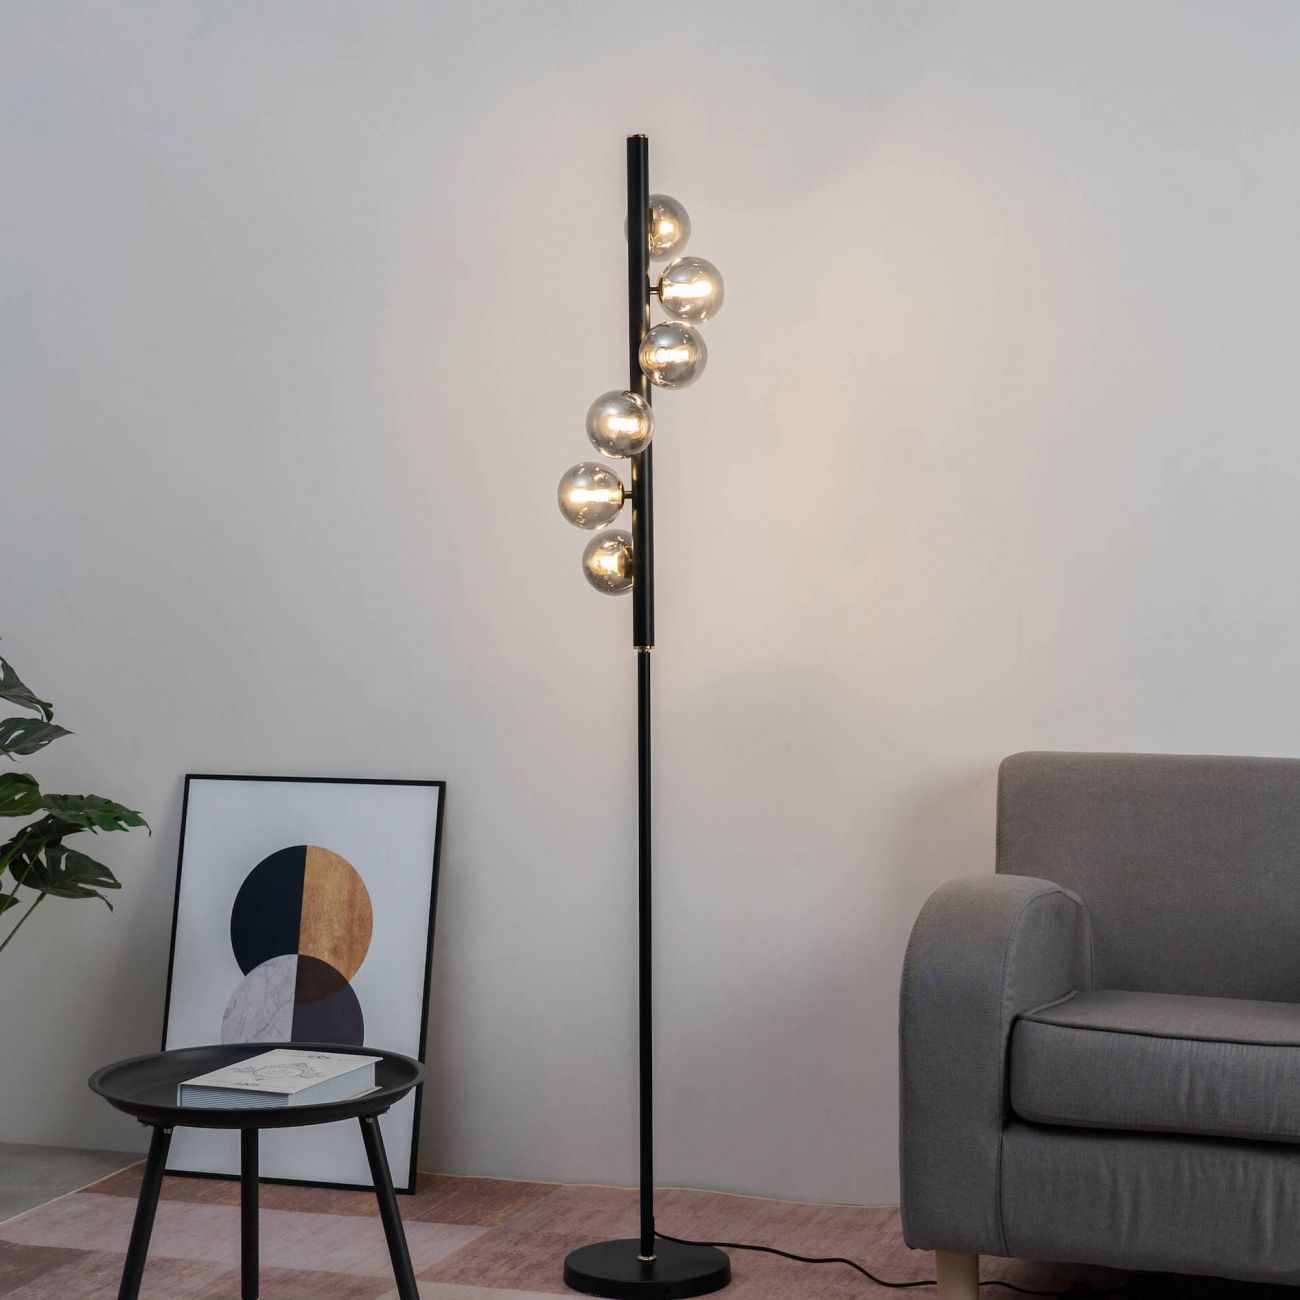 Favorite Modern Table Light 6 Smoked Glasses – Nizzalo In Smoke Glass Floor Lamps (View 6 of 15)